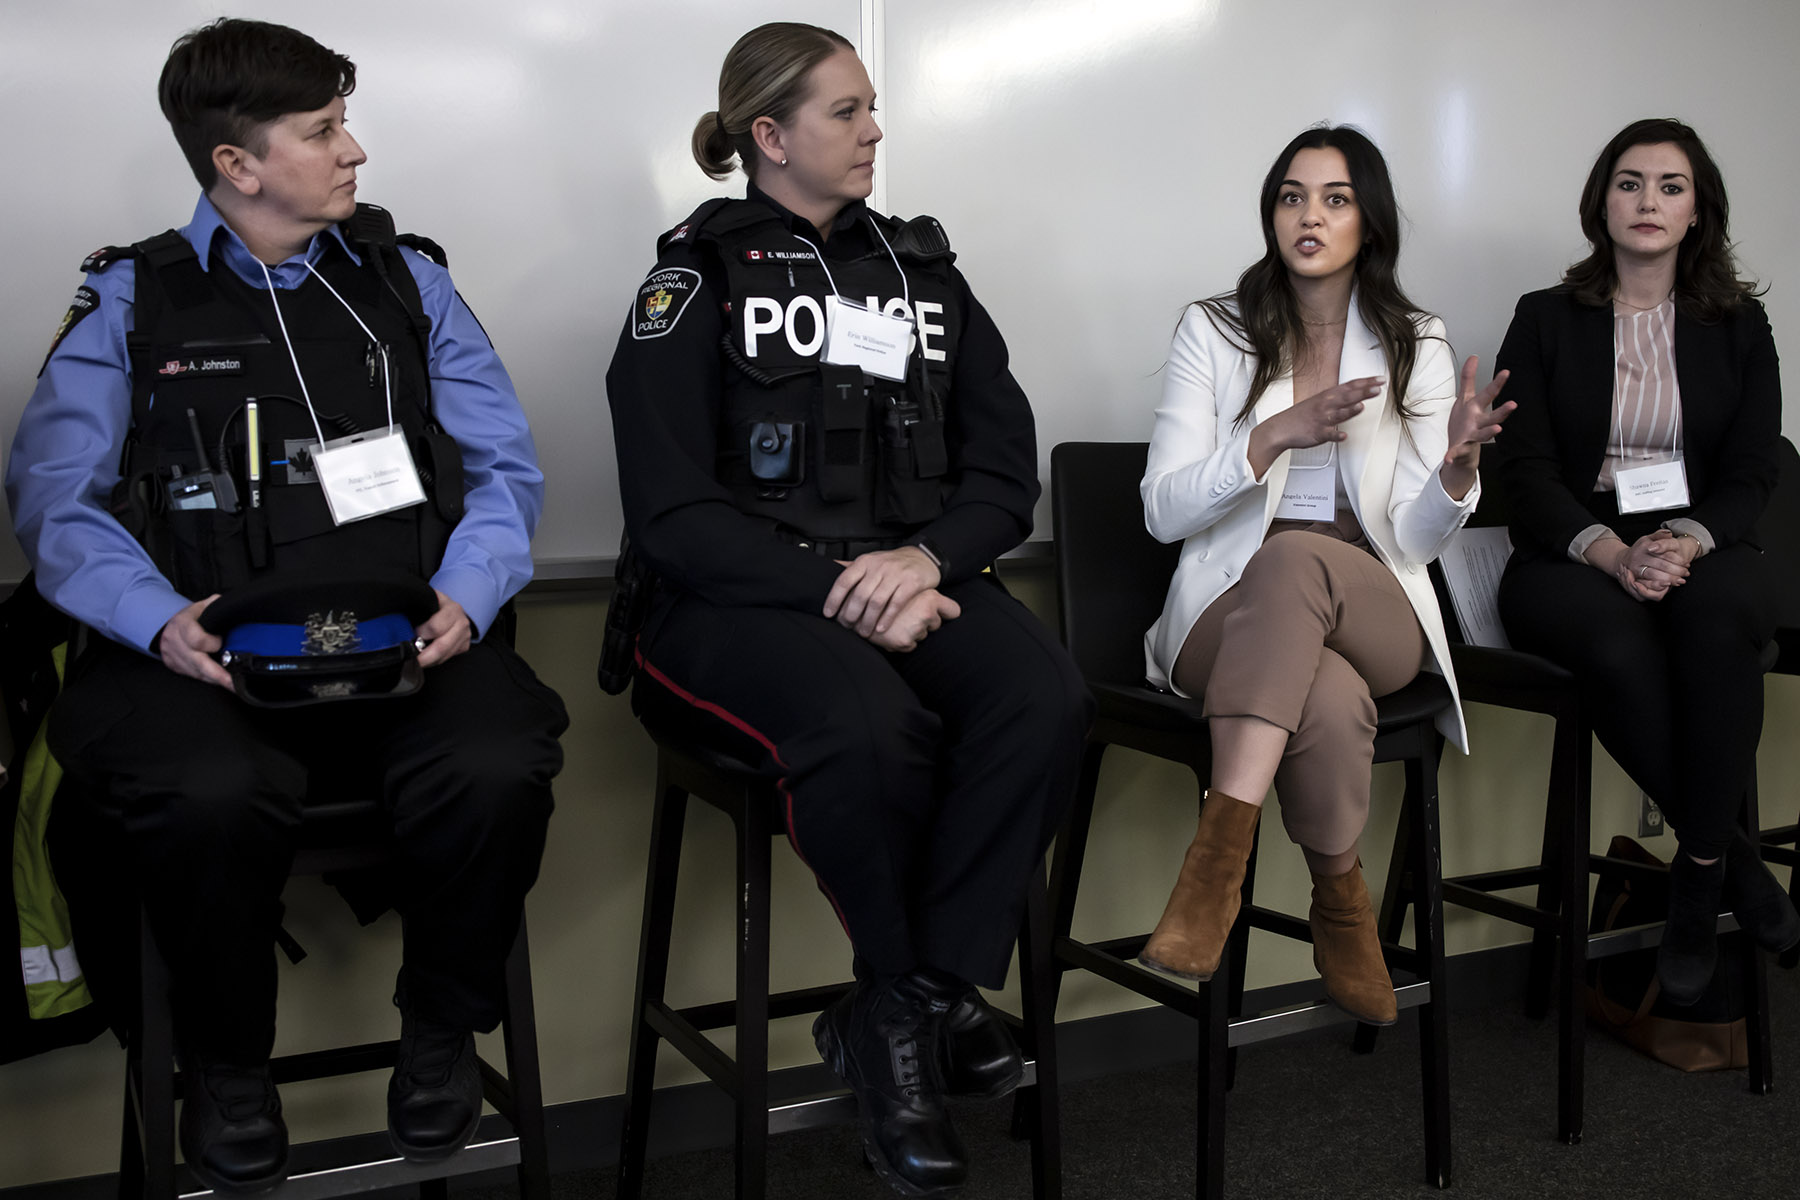 UofGH's Women in Business panel